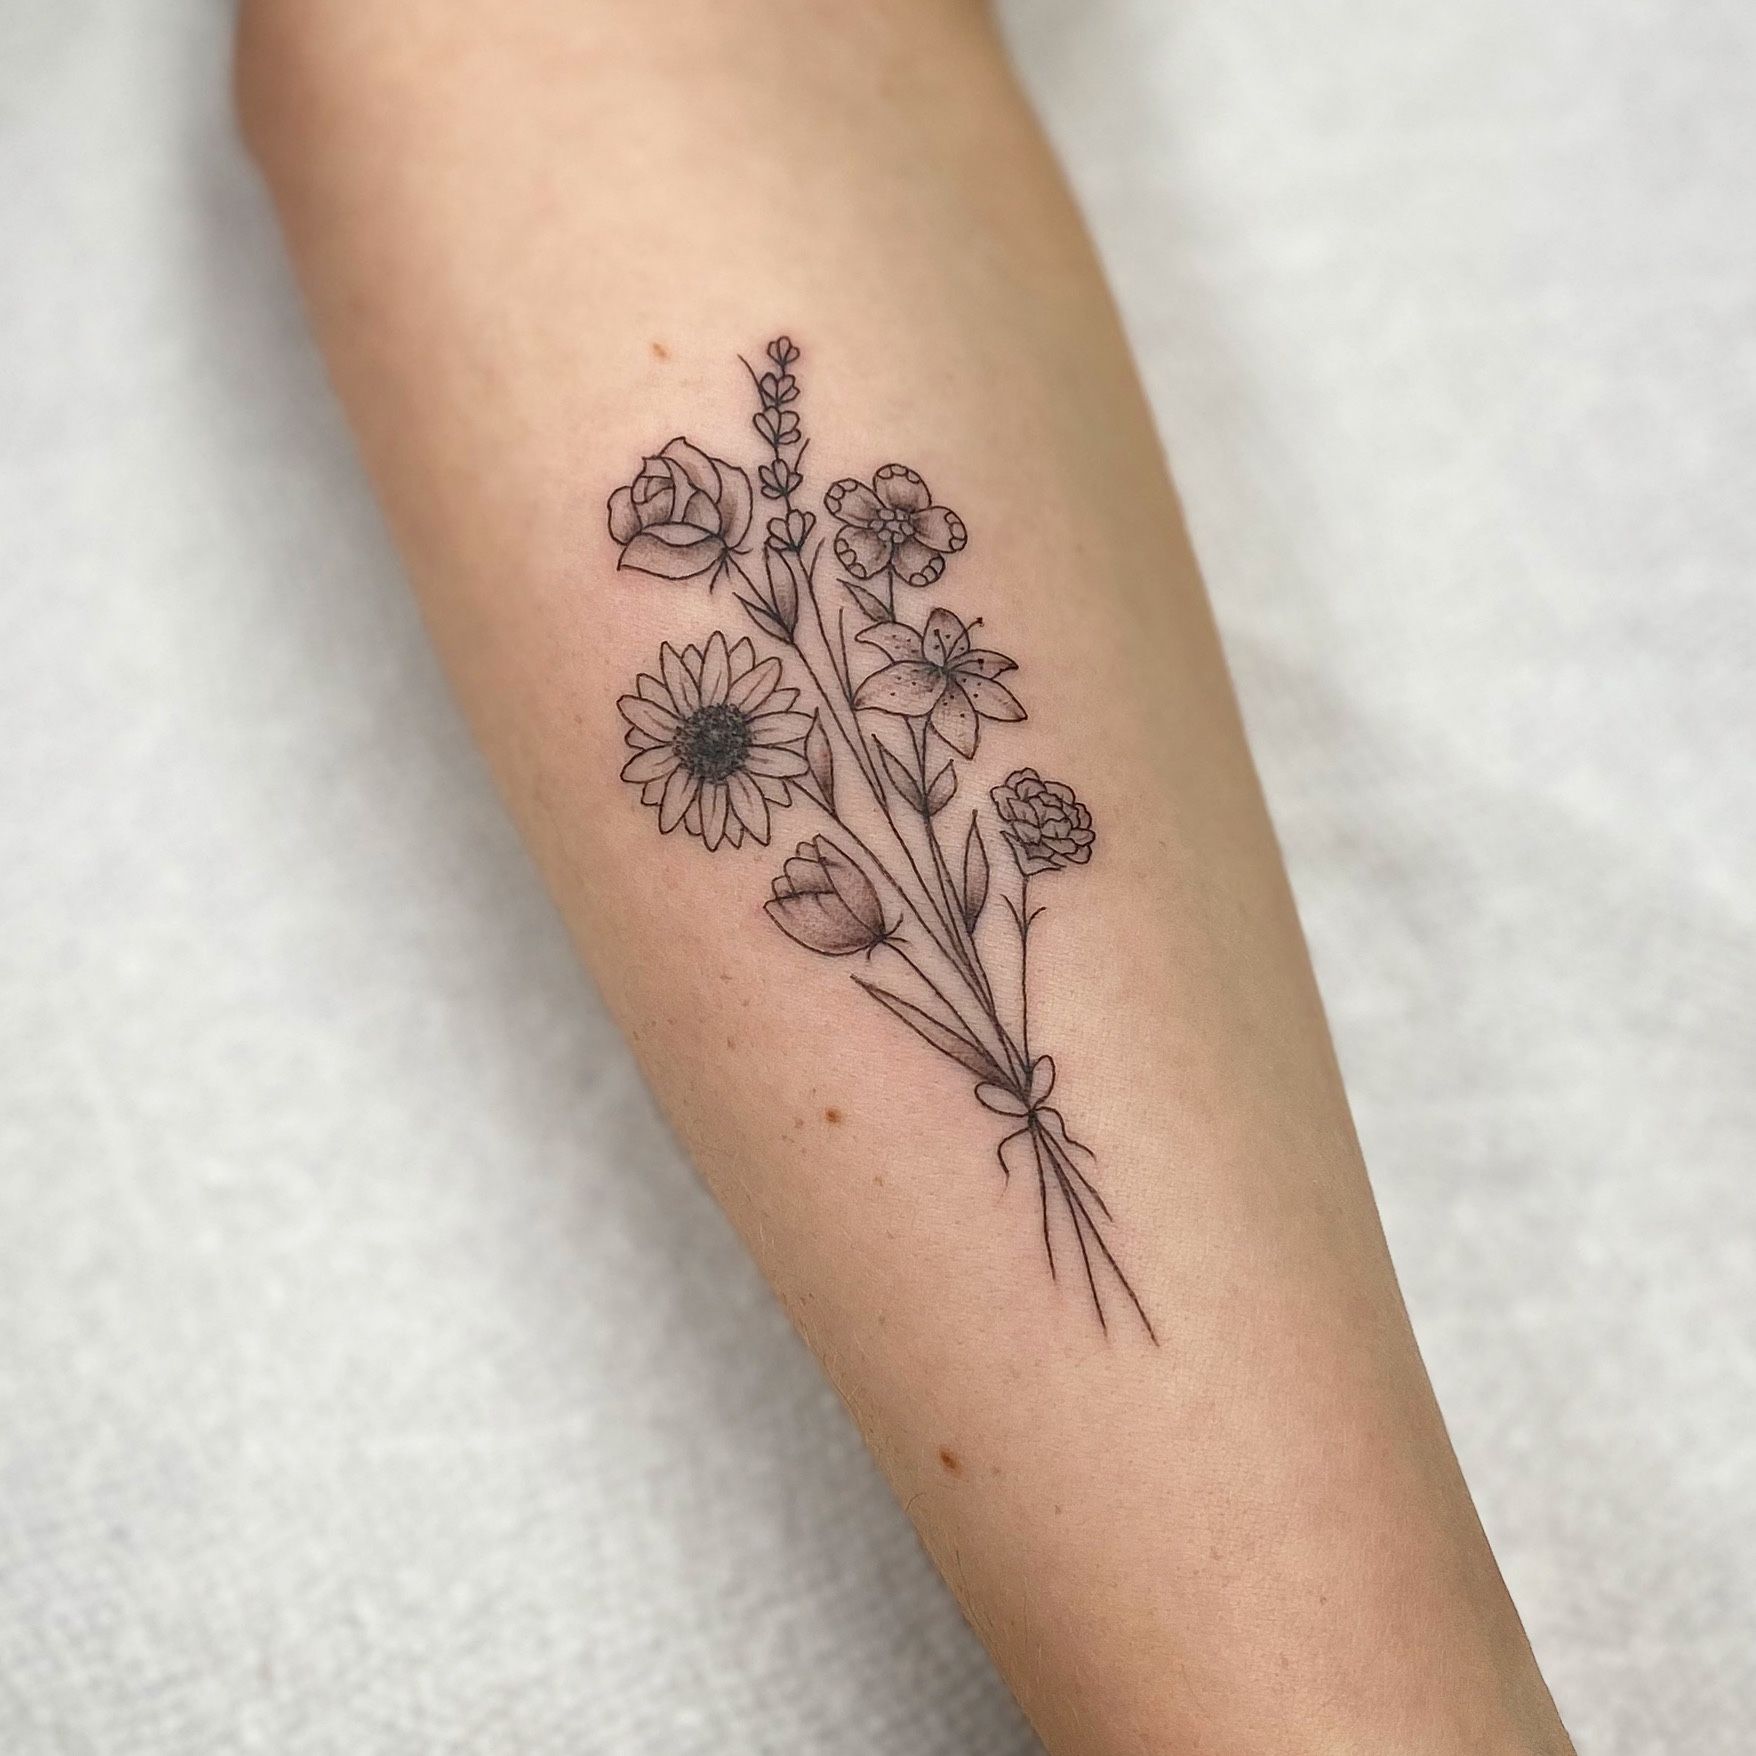 60,547 Simple Flower Tattoo Images, Stock Photos, 3D objects, & Vectors |  Shutterstock